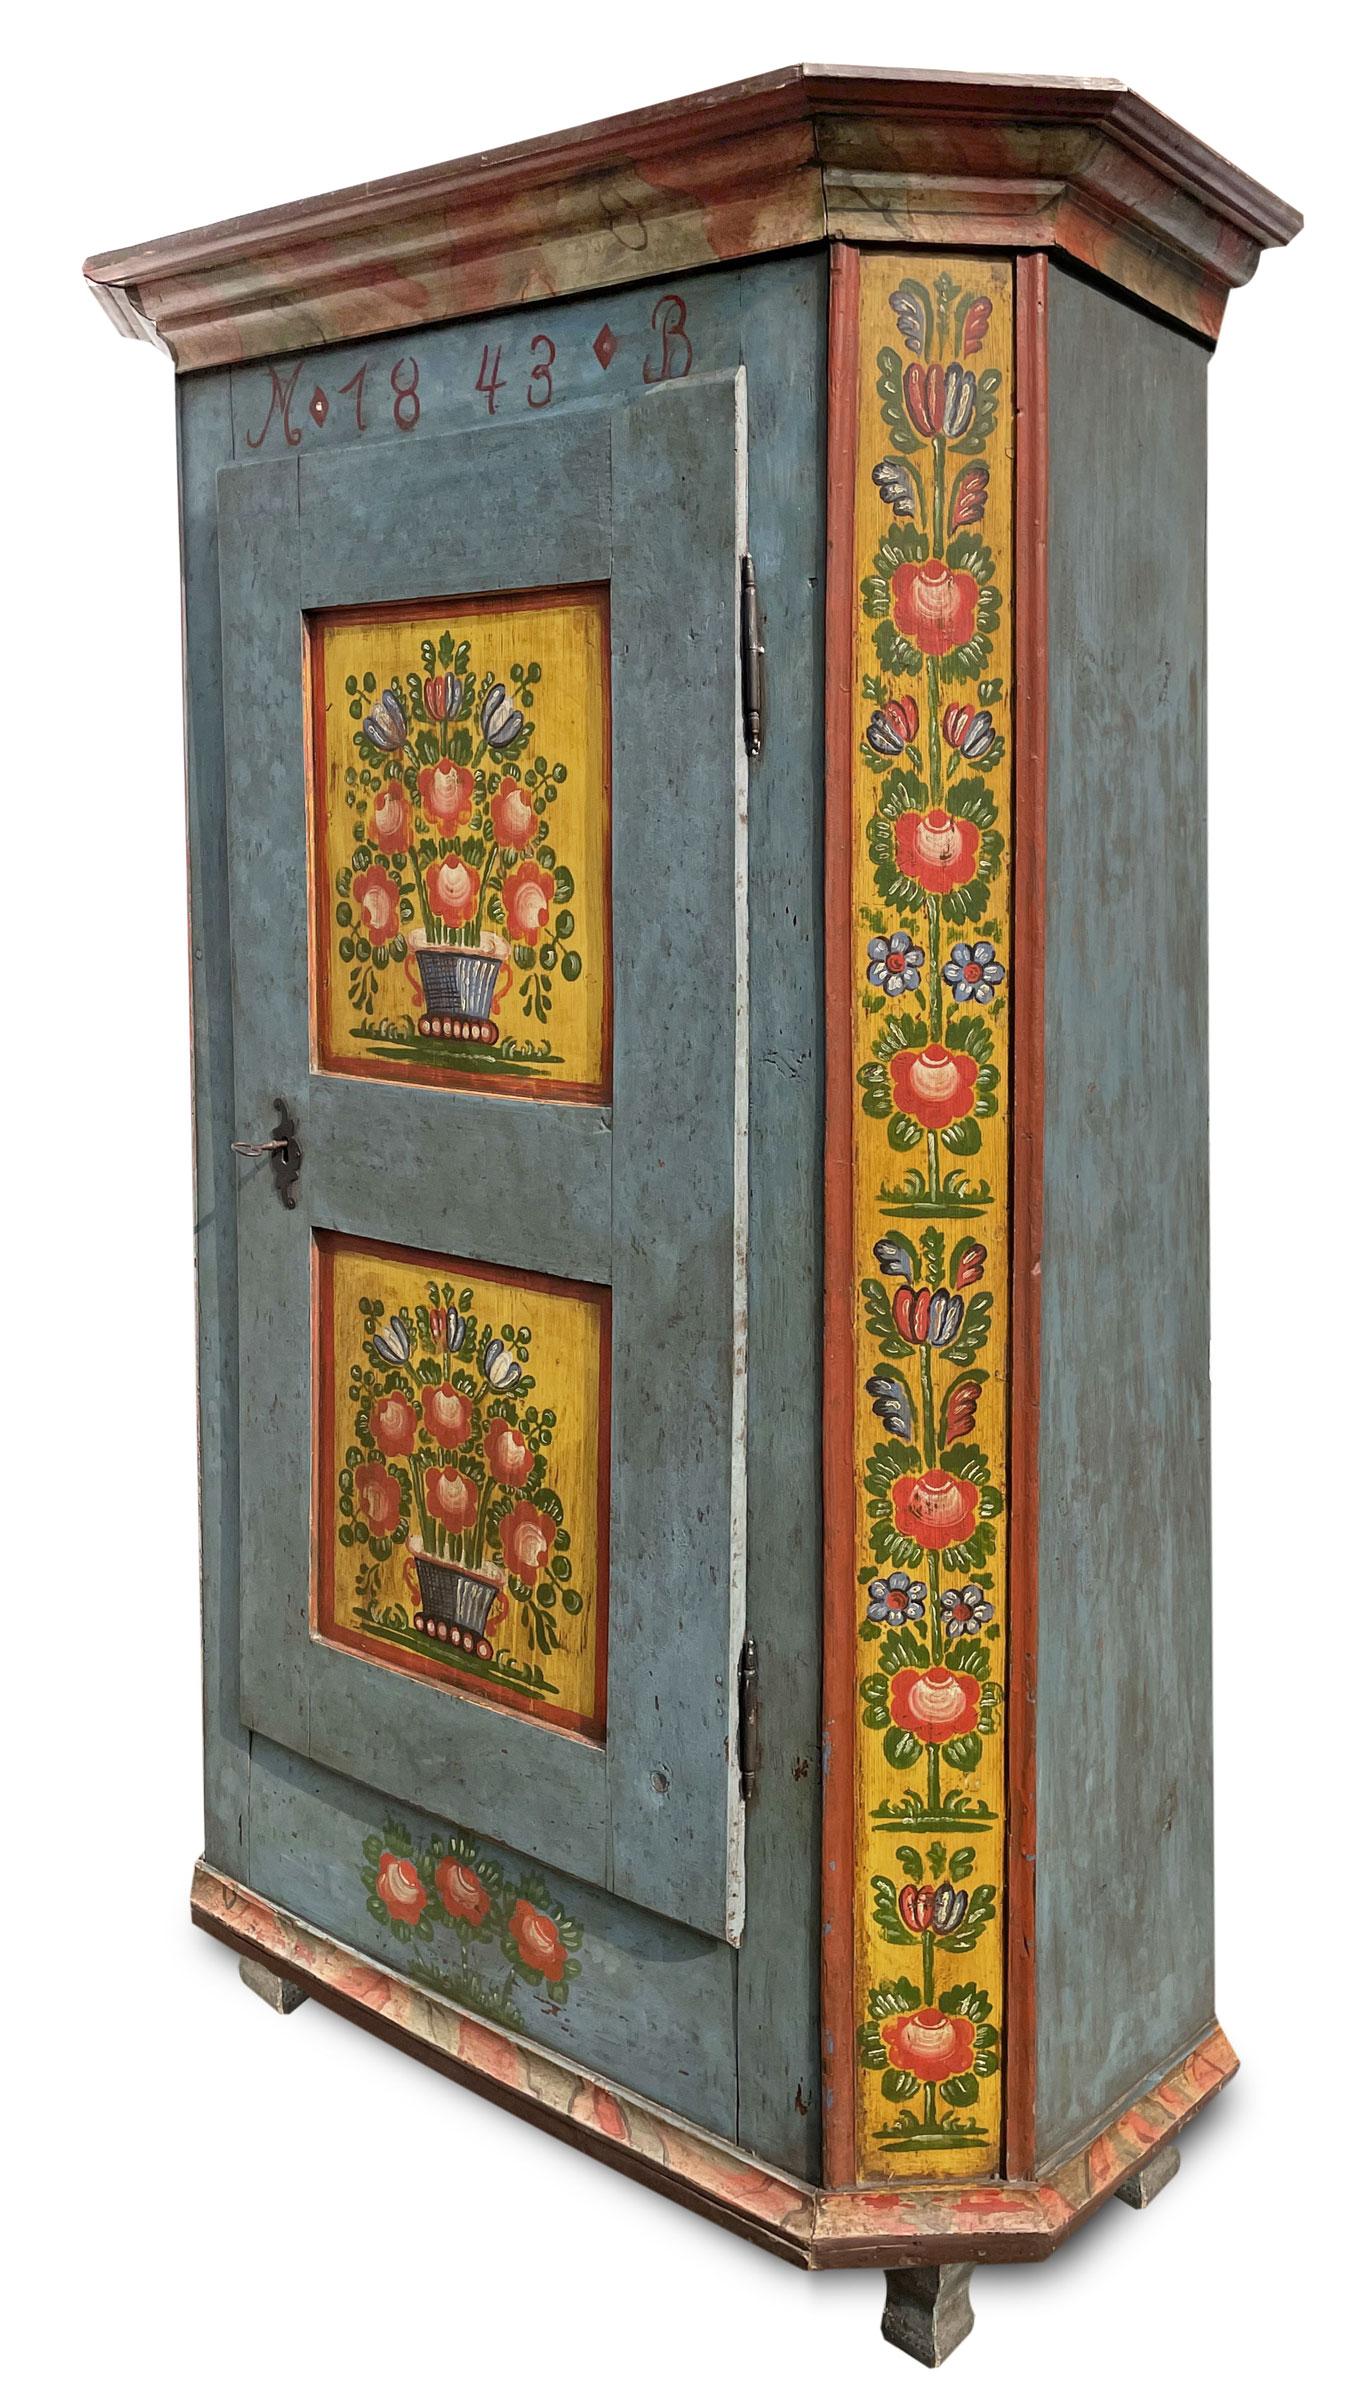 Tyrolean light blue painted wardrobe

H. 180cm - L. 100cm (116 cm to the frames) - P. 45cm (53cm to the frames)

Tyrolean painted wardrobe with one door, entirely painted in light blue.
On the door two large yellow backgrounds contain floral